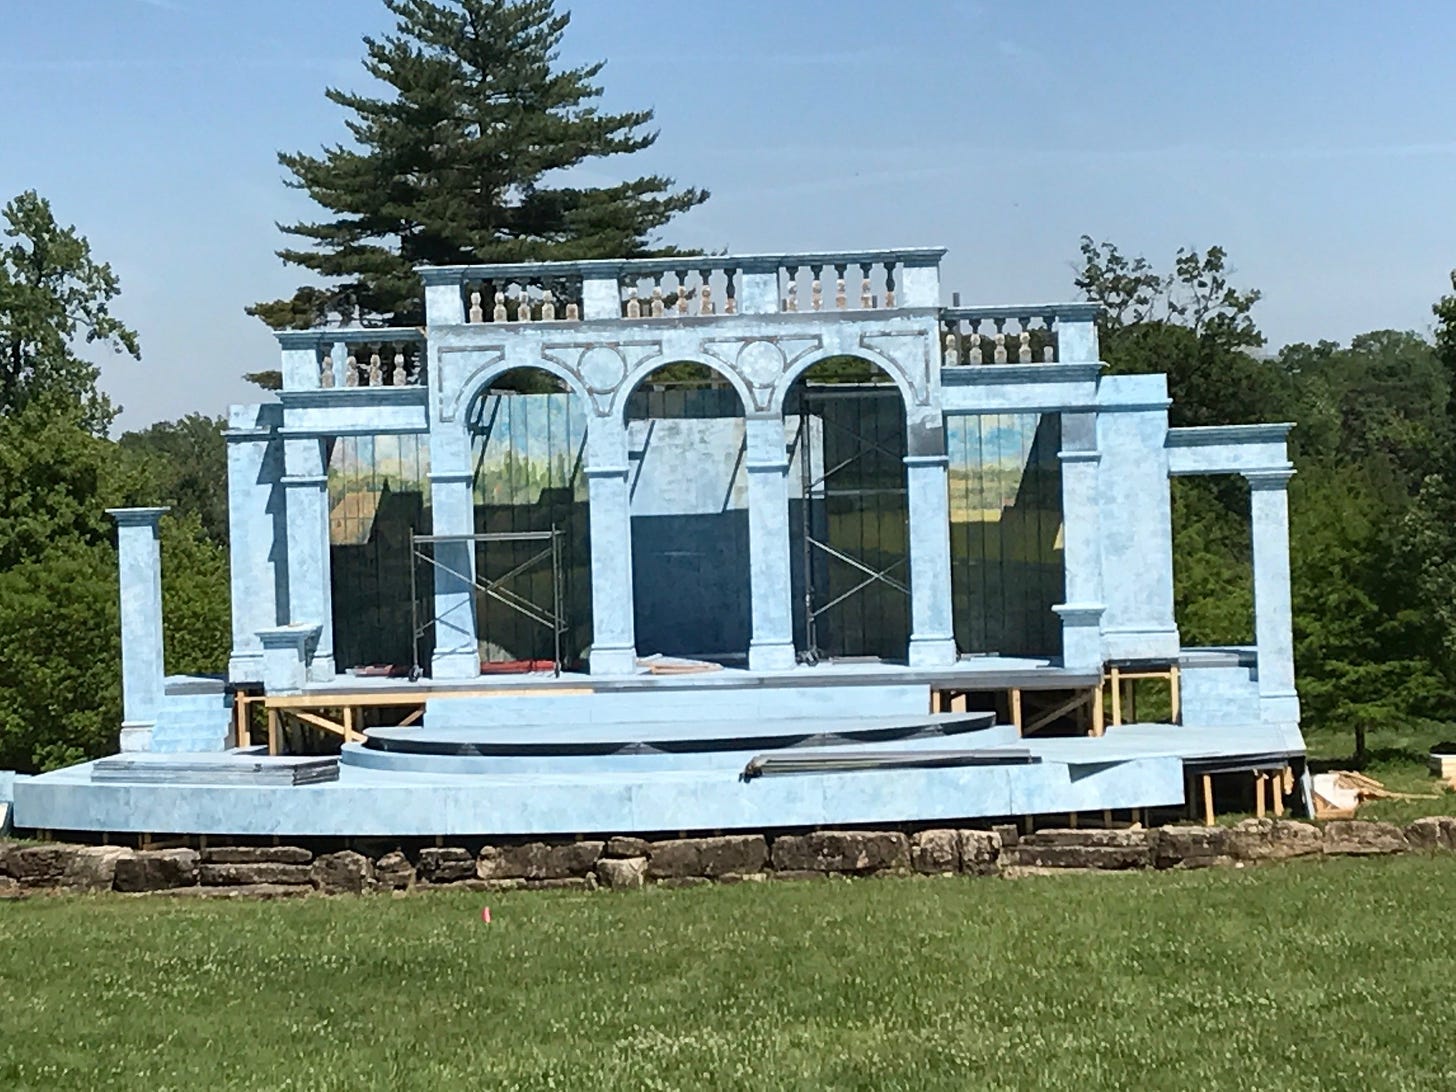 Stage being constructed in park setting